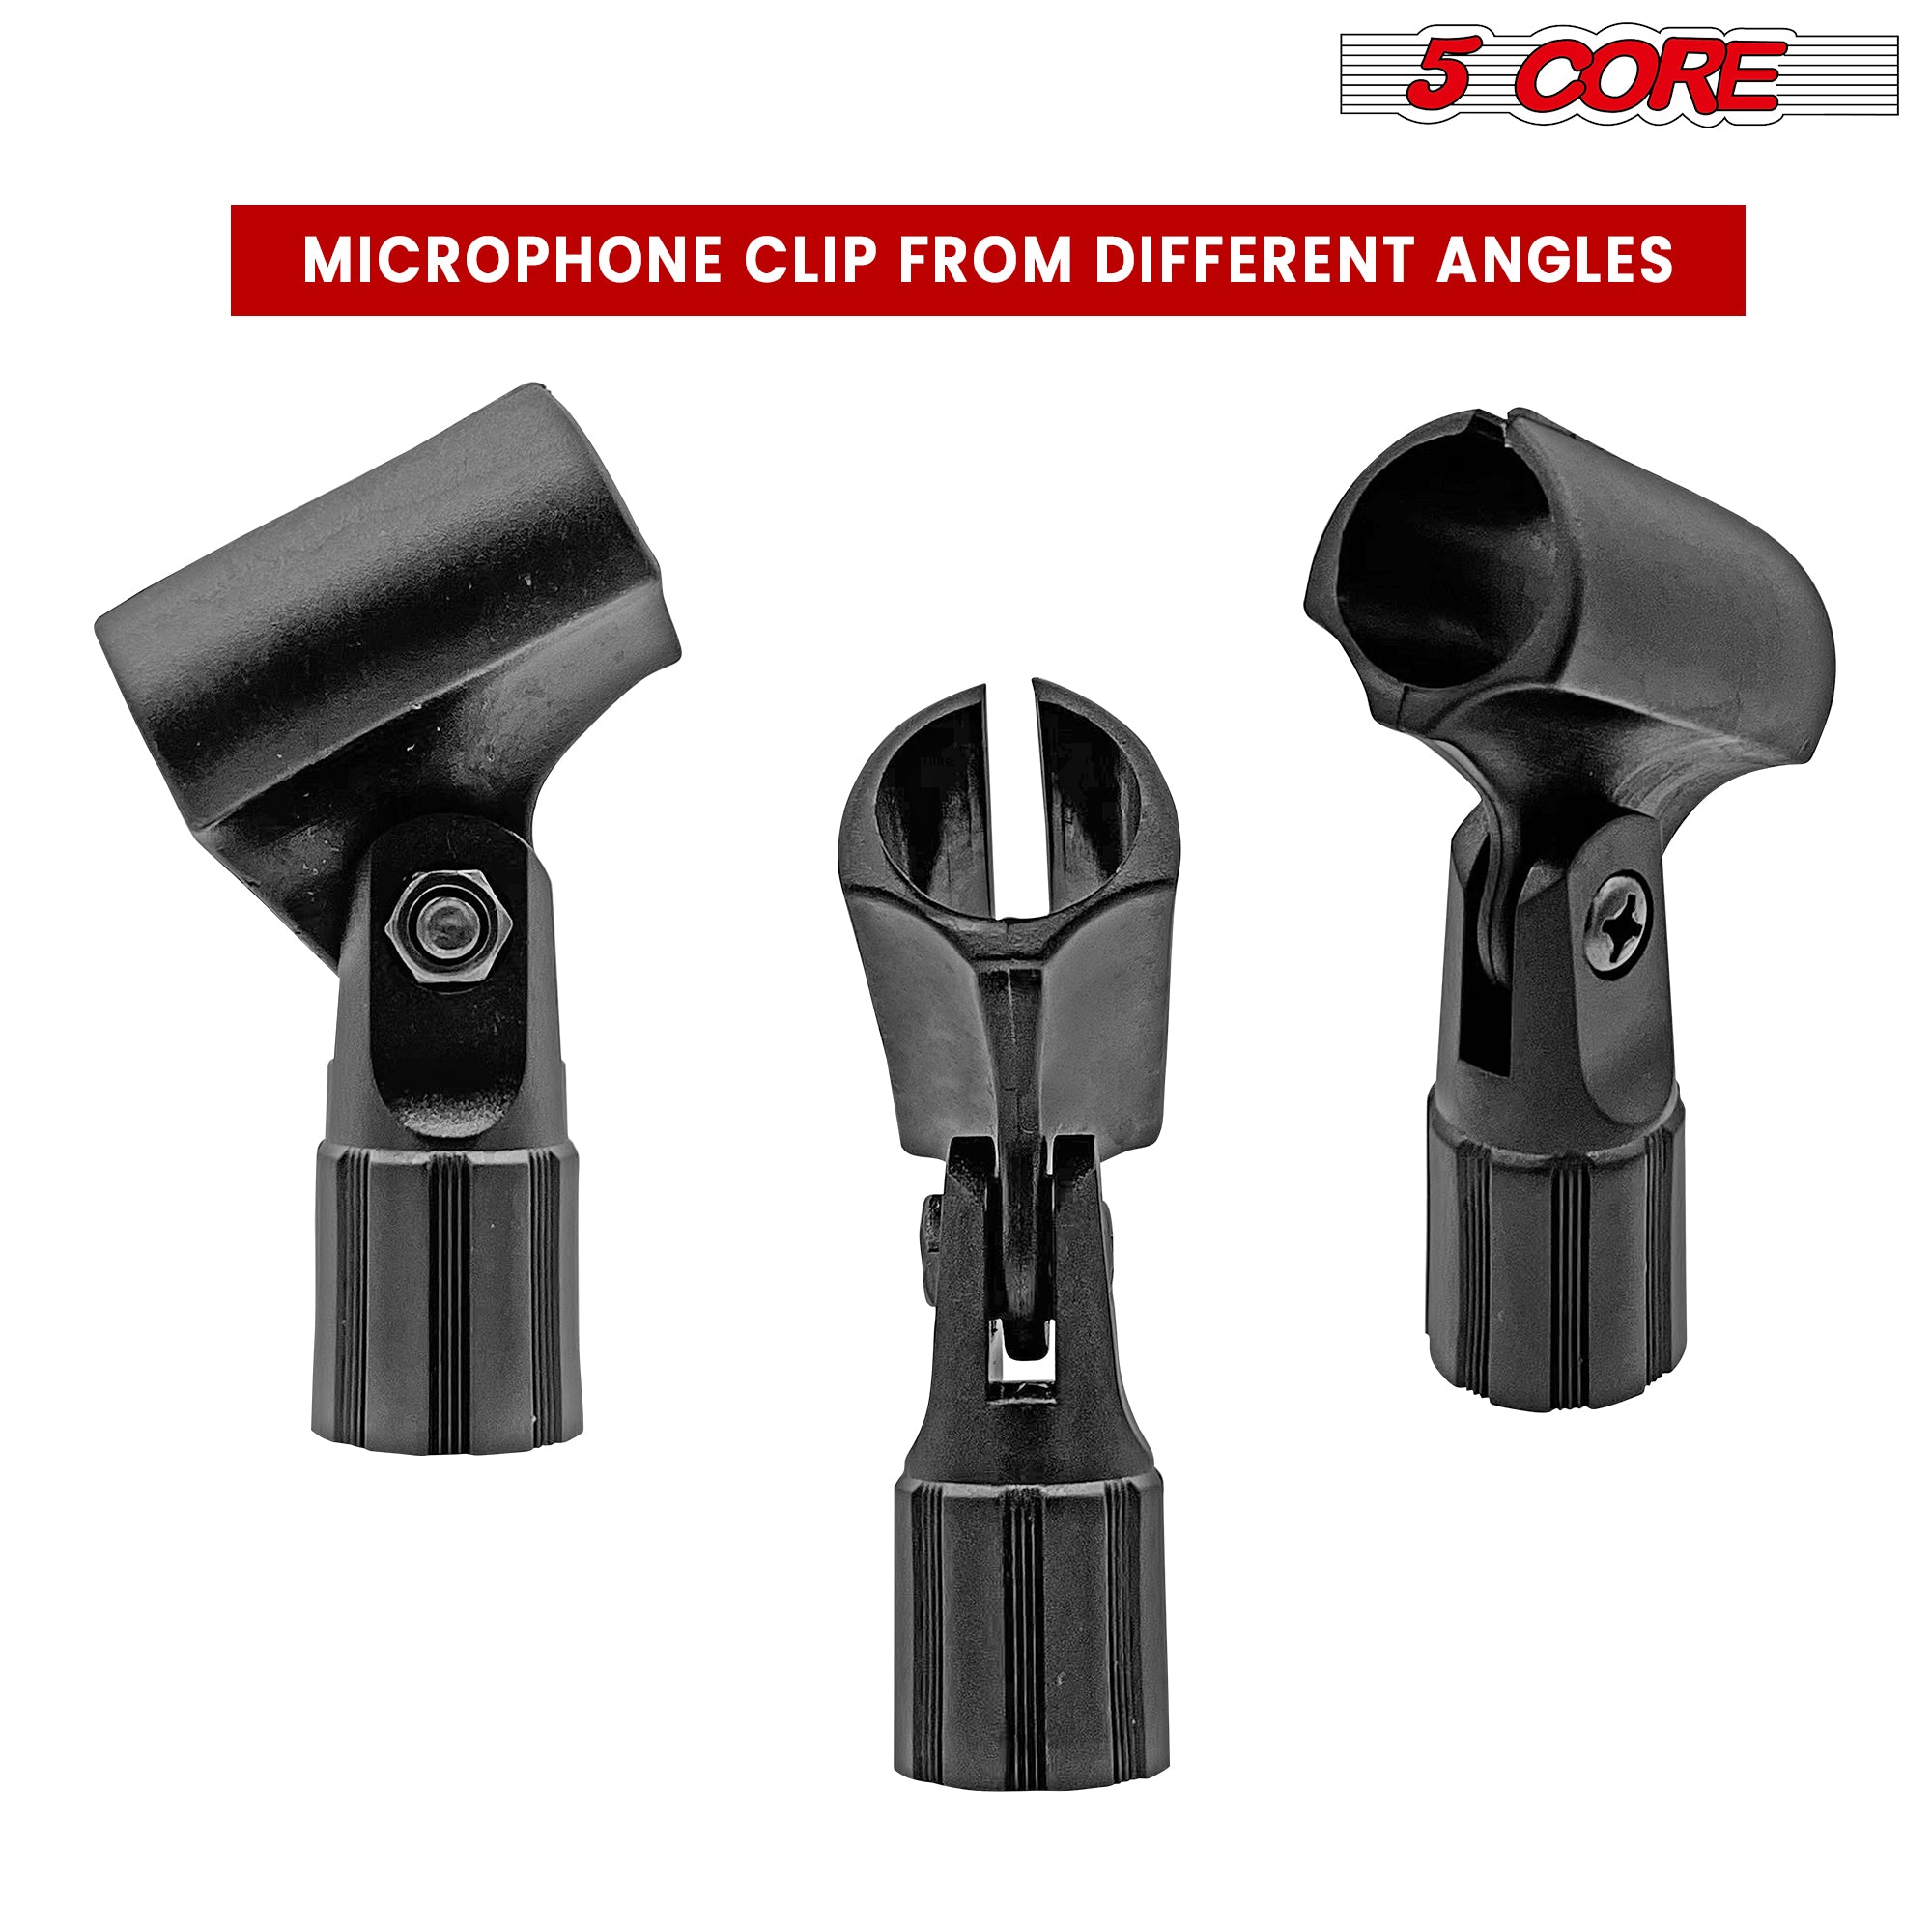 5 Core Pencil Microphone Clip Holder Black Angle Adjustable Slim Condenser Mic Adapter with Universal 5/8" Male to 3/8" Female Adapter Skinny Microphone Clips 4Pcs -MC 08 4PCS